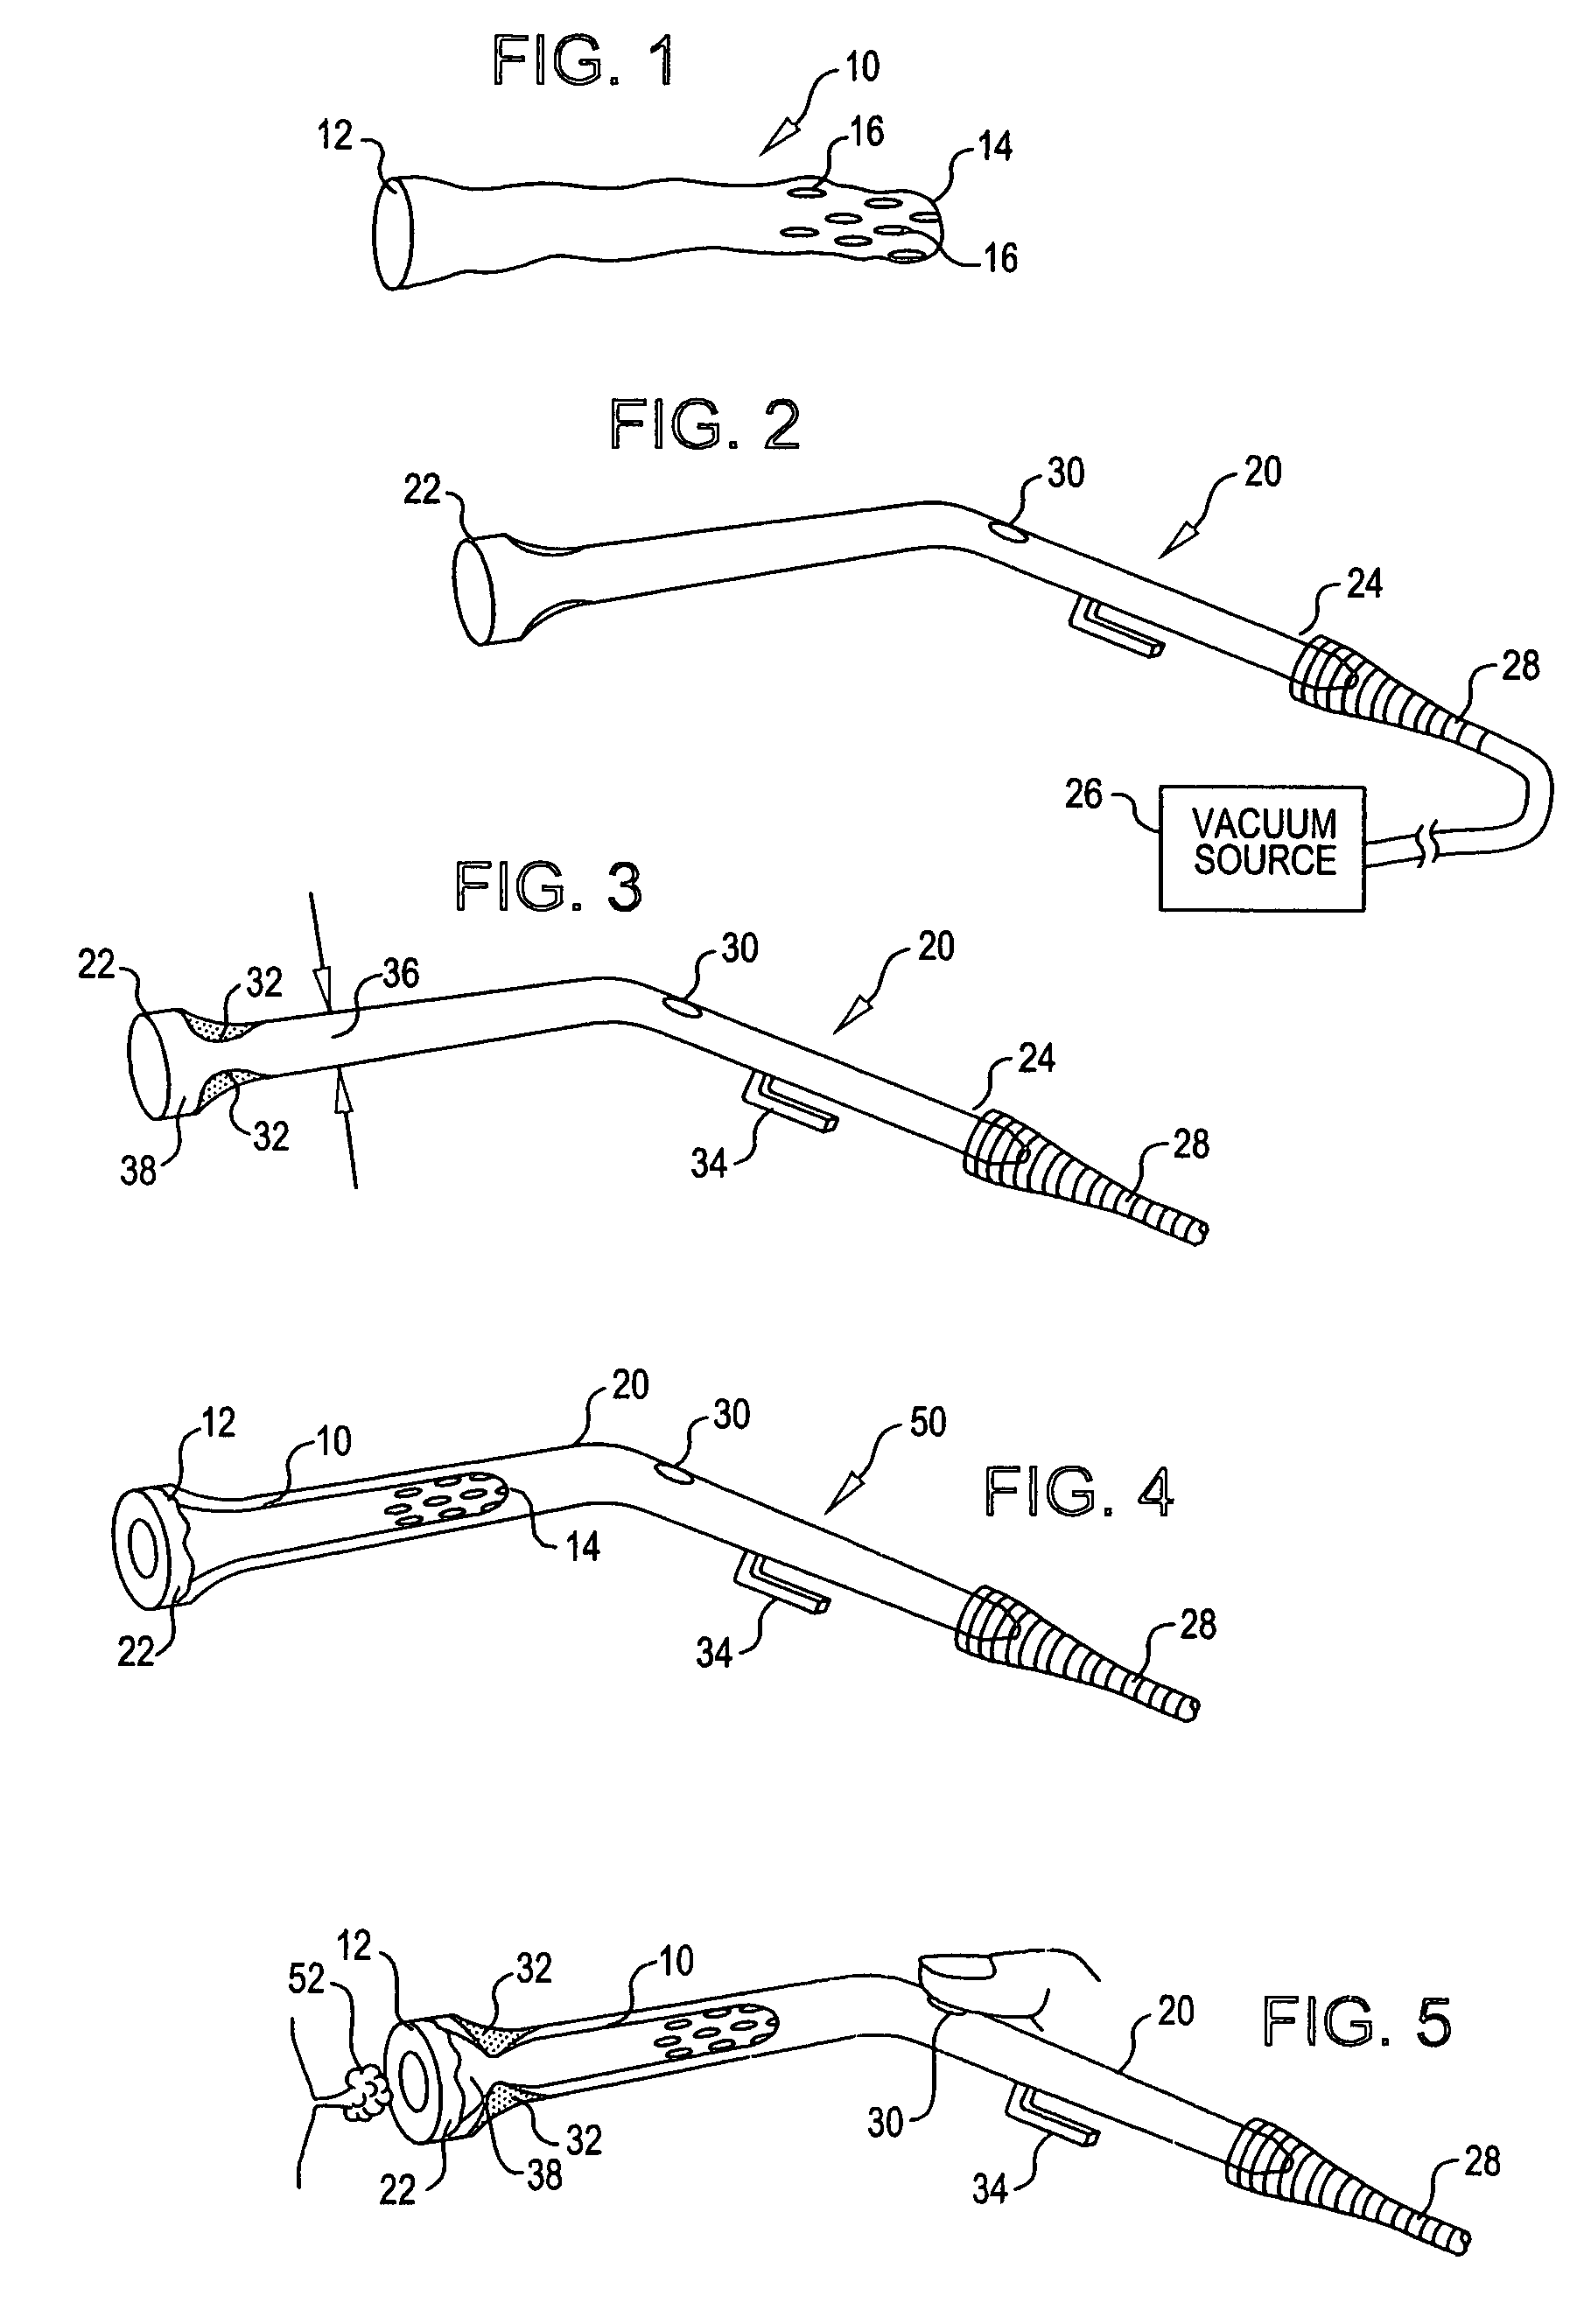 System and method for capturing body tissue samples